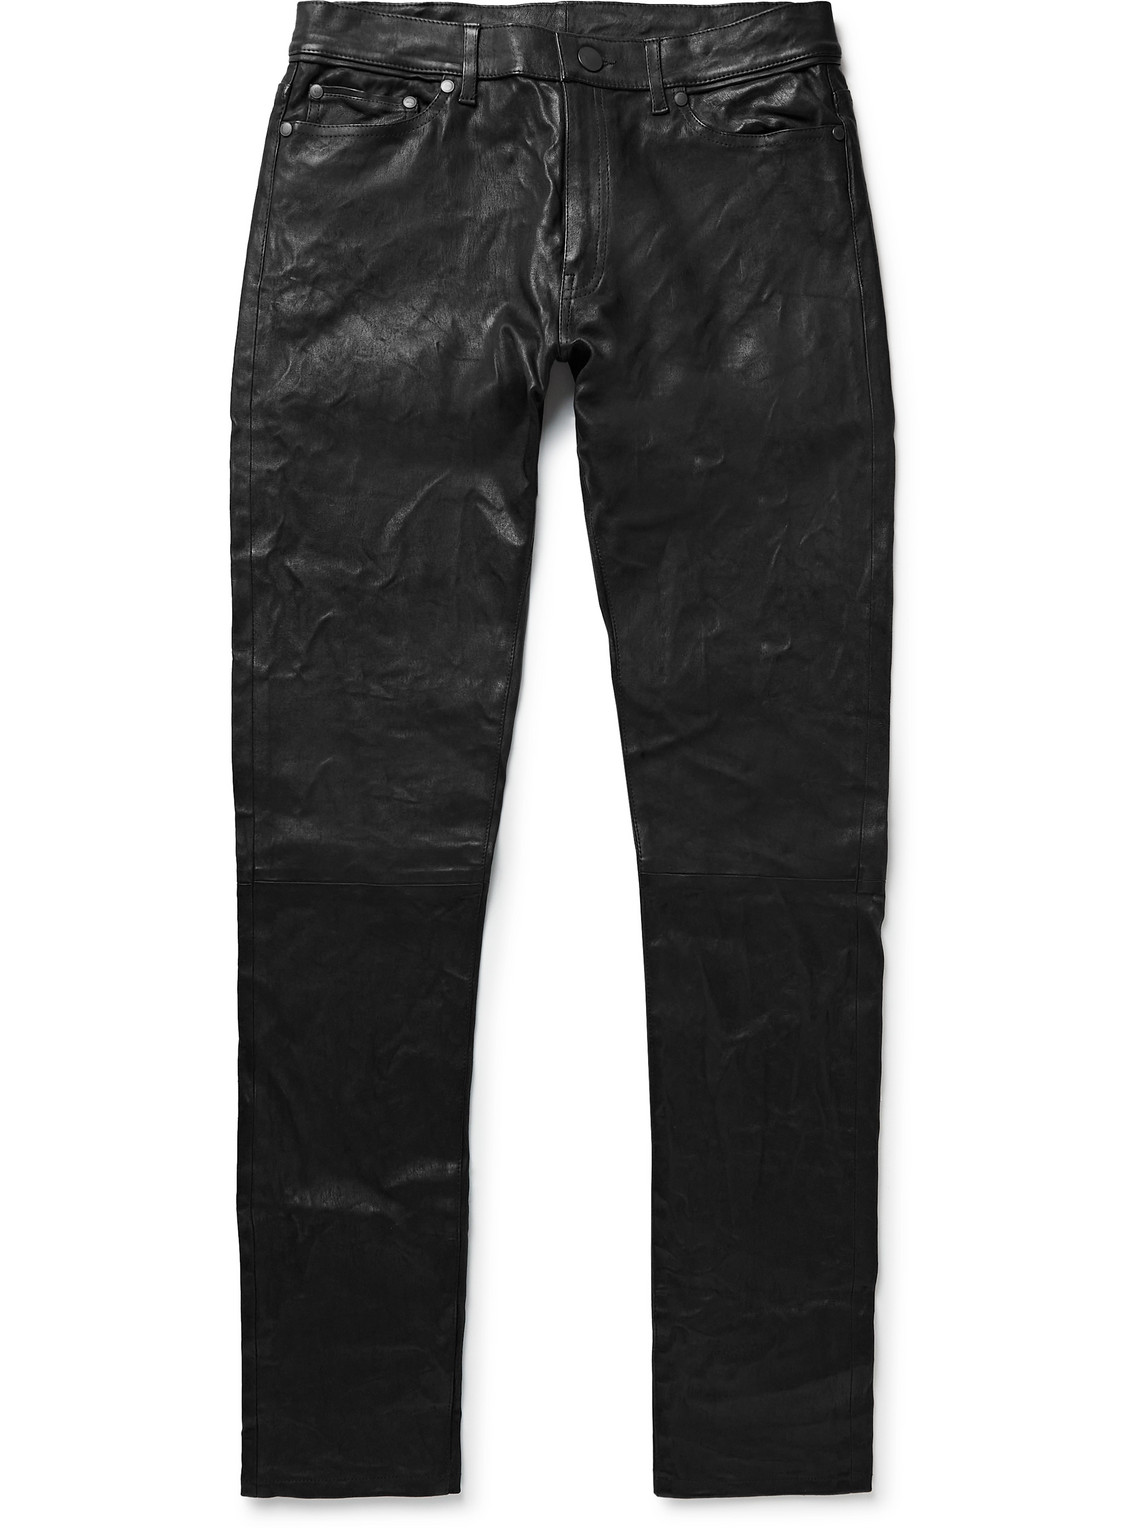 Cast 2 Skinny-Fit Leather Trousers